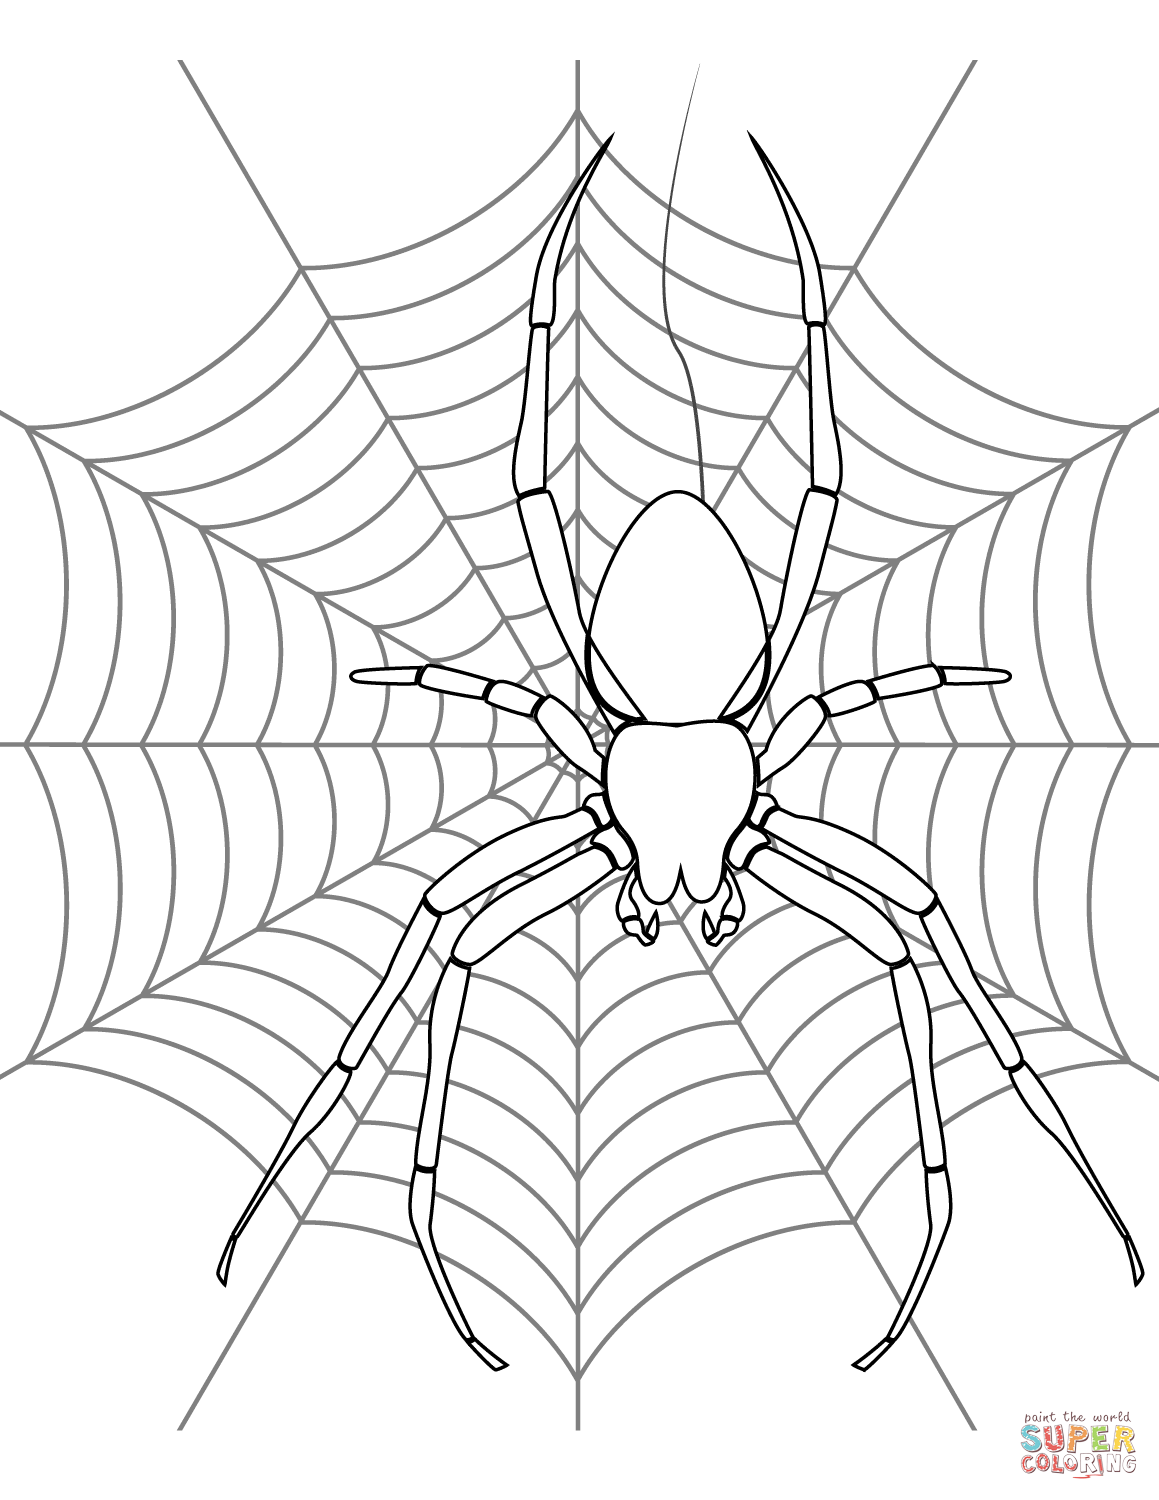 Spider on its web coloring page free printable coloring pages